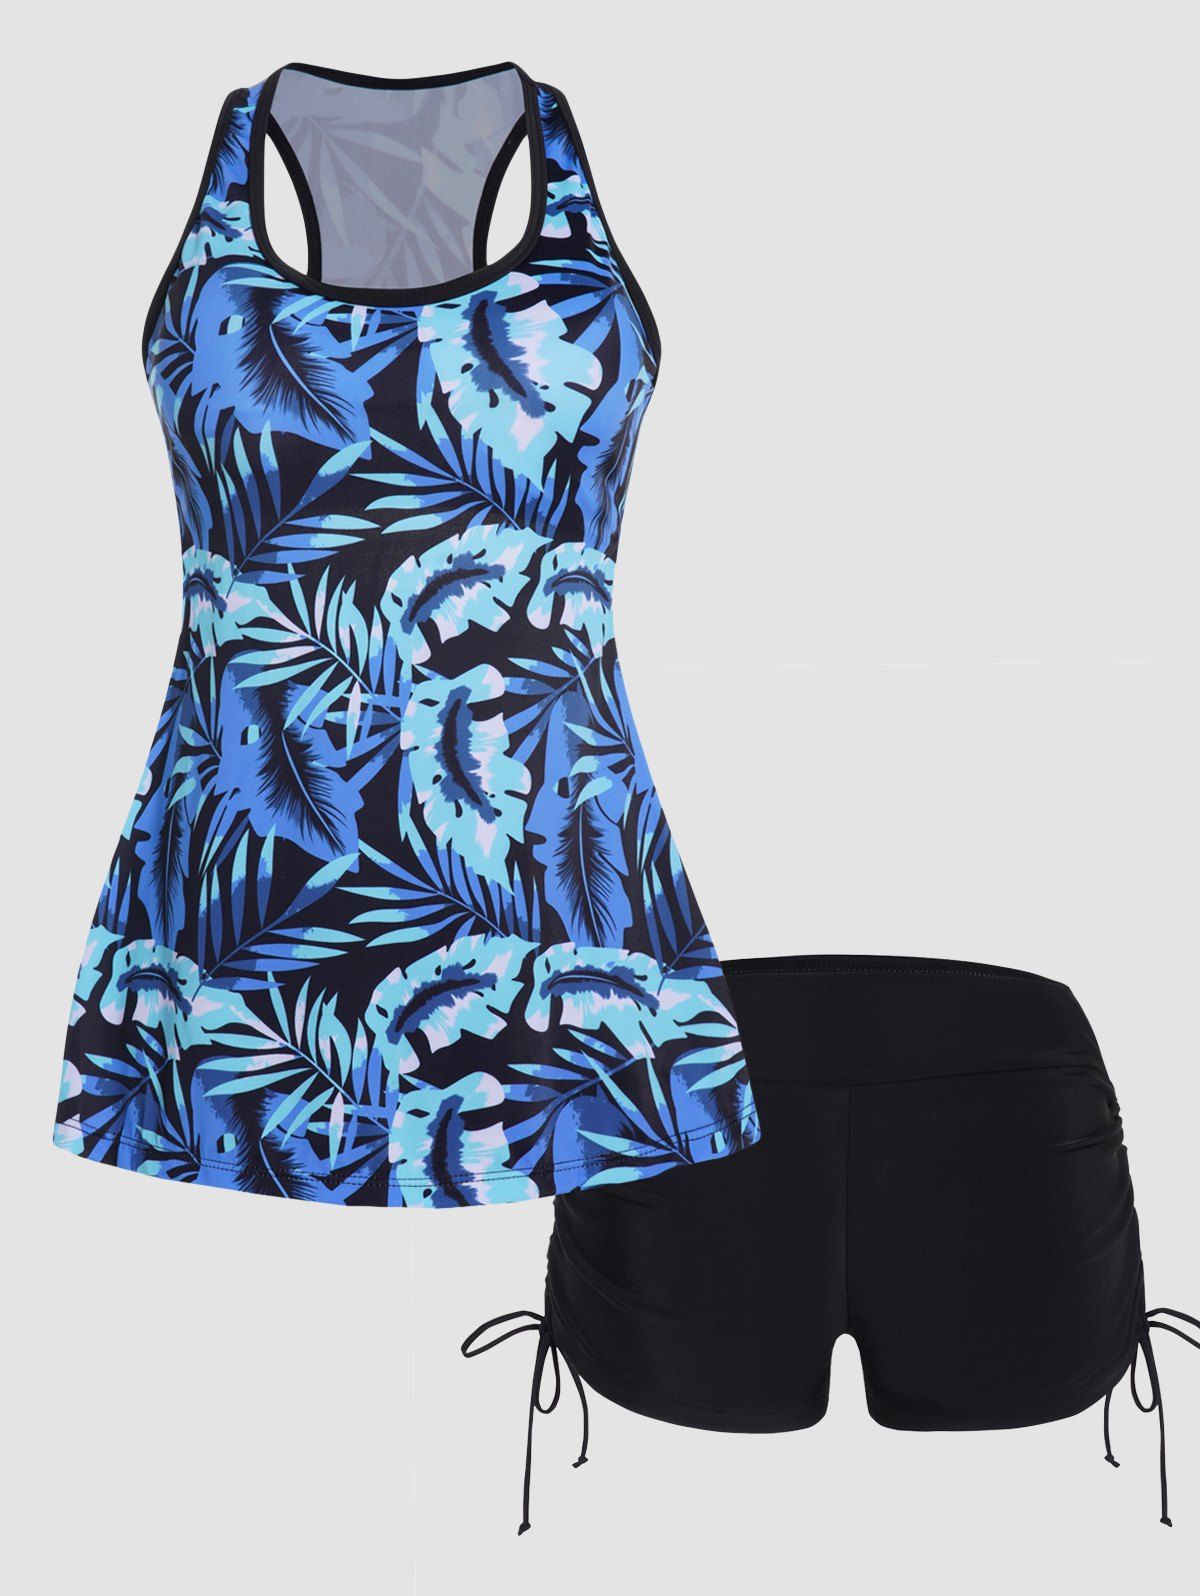 Tropical Leaf Print Vacation Tankini Swimsuit Cut Out Padded Tankini Two Piece Swimwear Cinched Boyleg Bathing Suit - BLUE 2XL